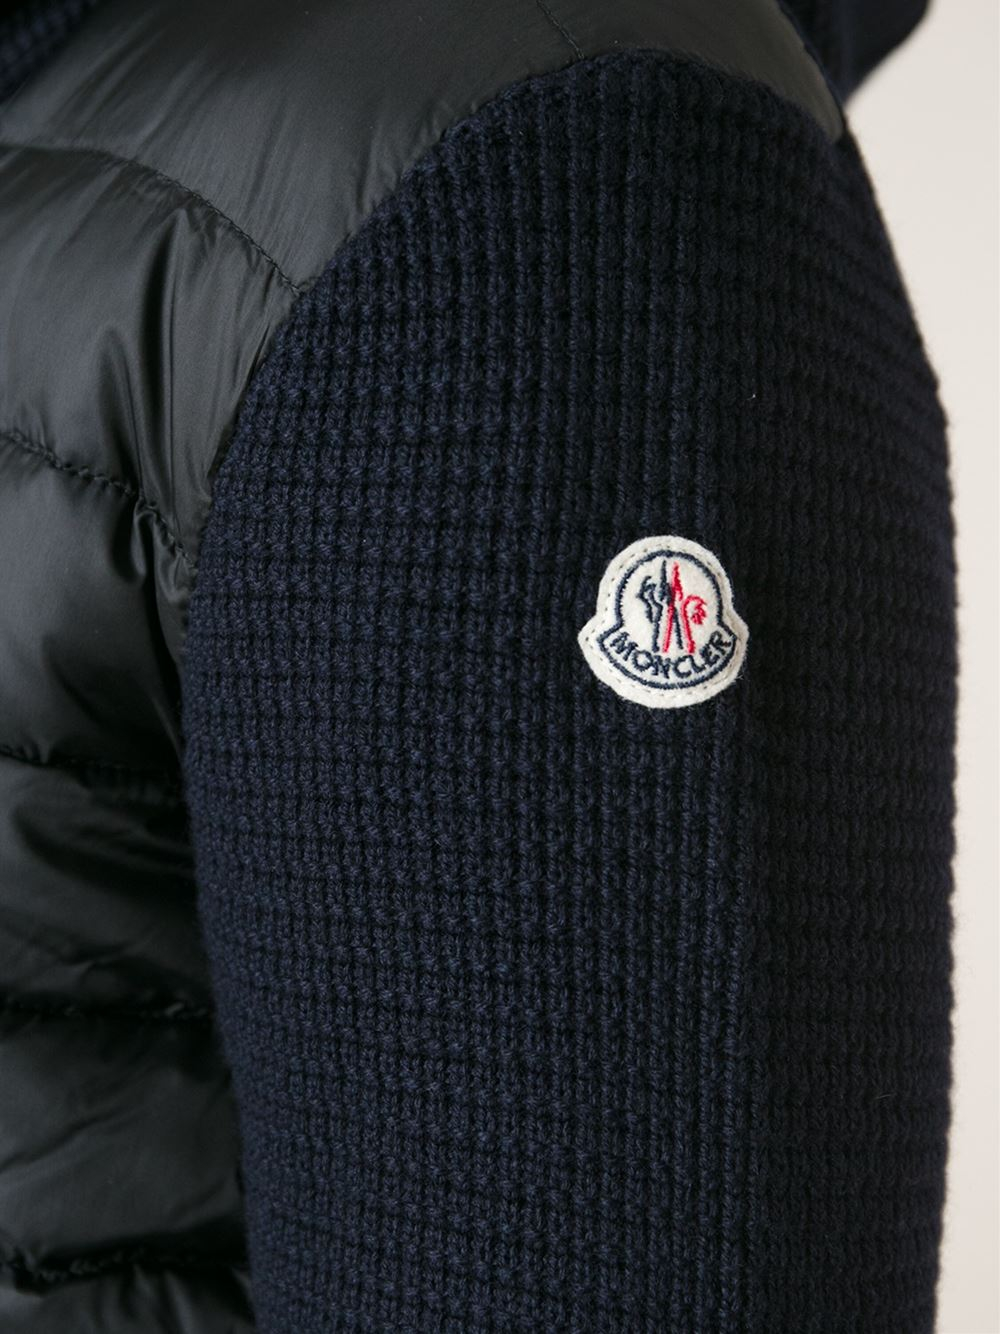 Lyst - Moncler Canut Knitted Jacket in Blue for Men